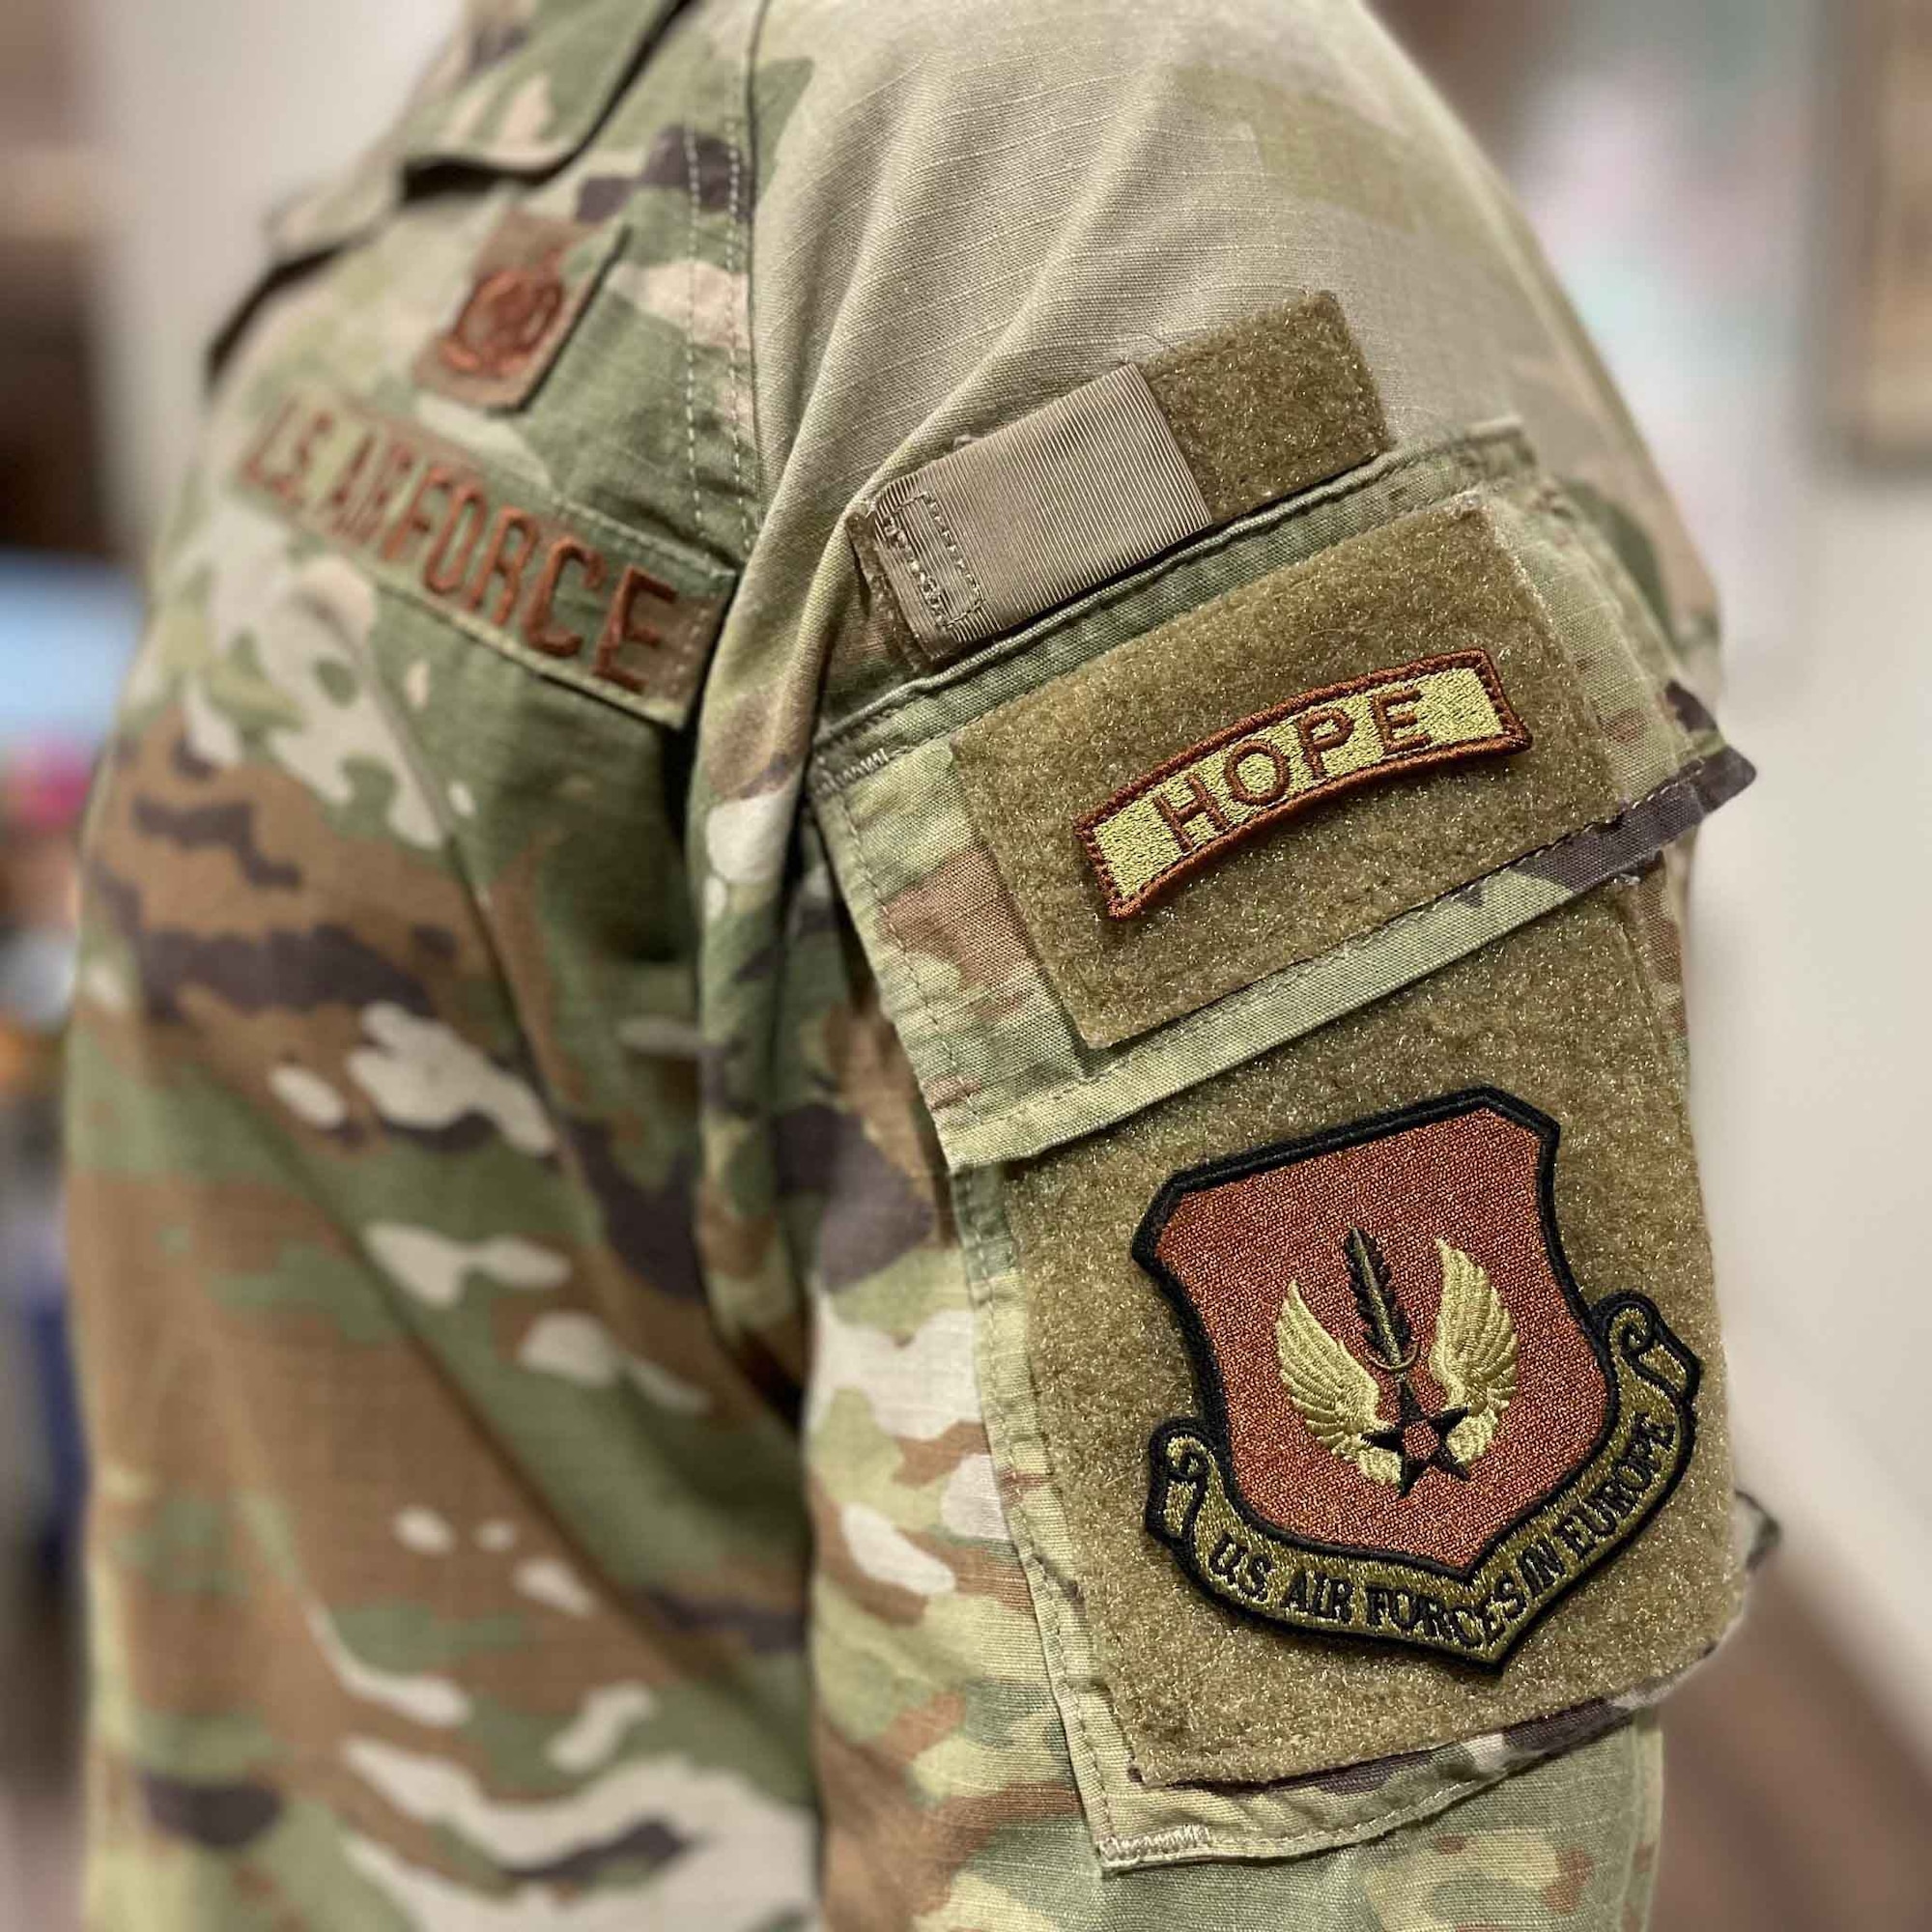 HOPE specialists may wear a provisional HOPE tab on their uniform at Royal Air Force Lakenheath, England. To earn the tab, participants must attend six months of education in spiritual fitness, leadership development, volunteering, communication, and suicide intervention. (U.S. Air Force courtesy photo by Maj. Justin Szeker)